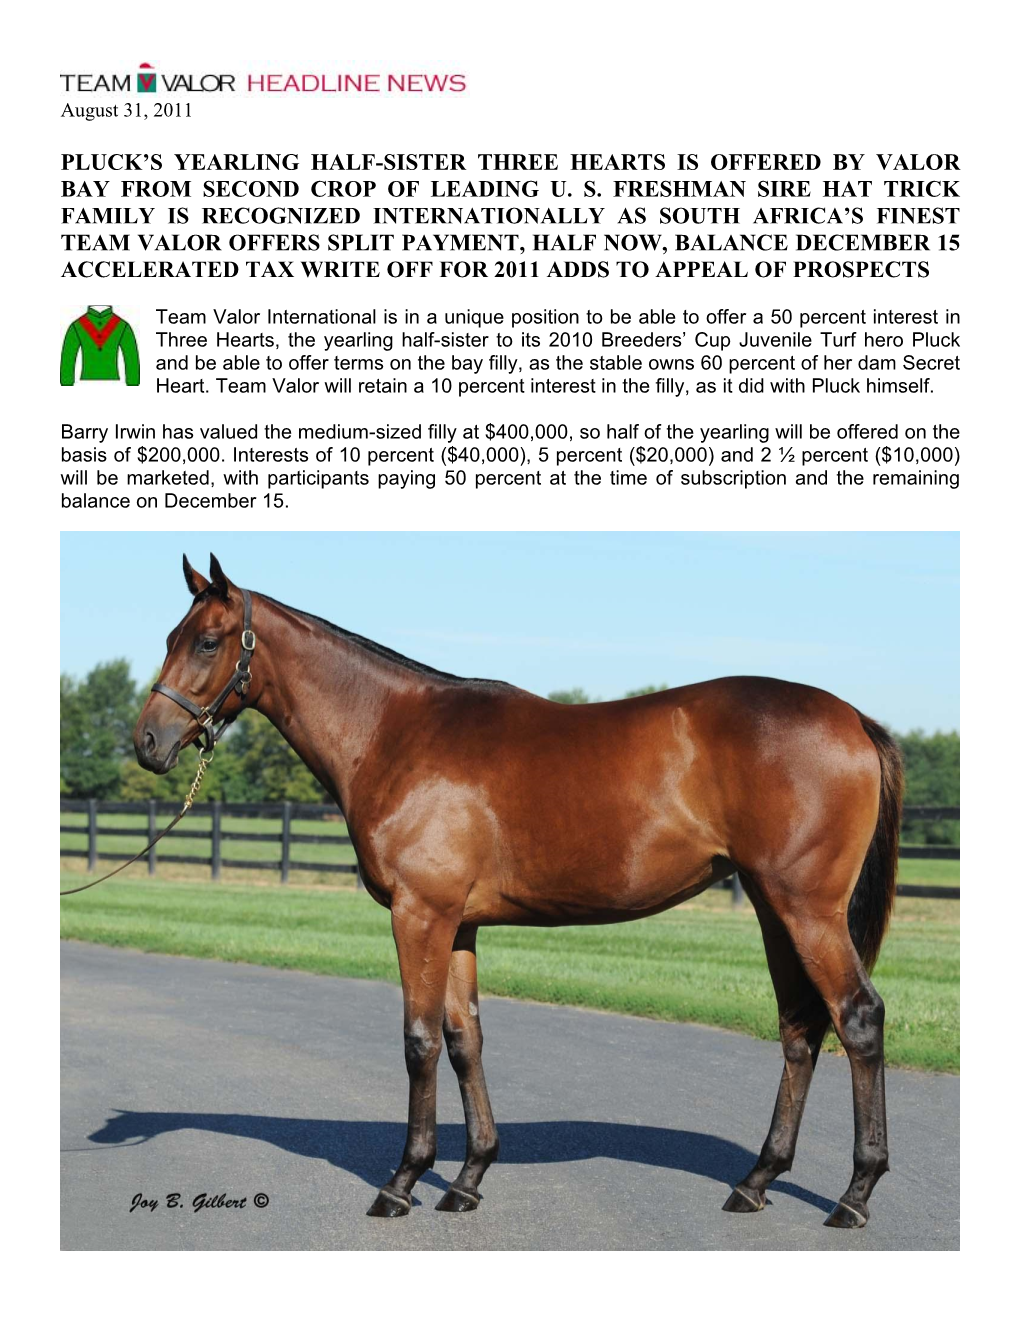 Team Valor Offers Pluck's Yearling Half Sister Three Hearts, Bay Is